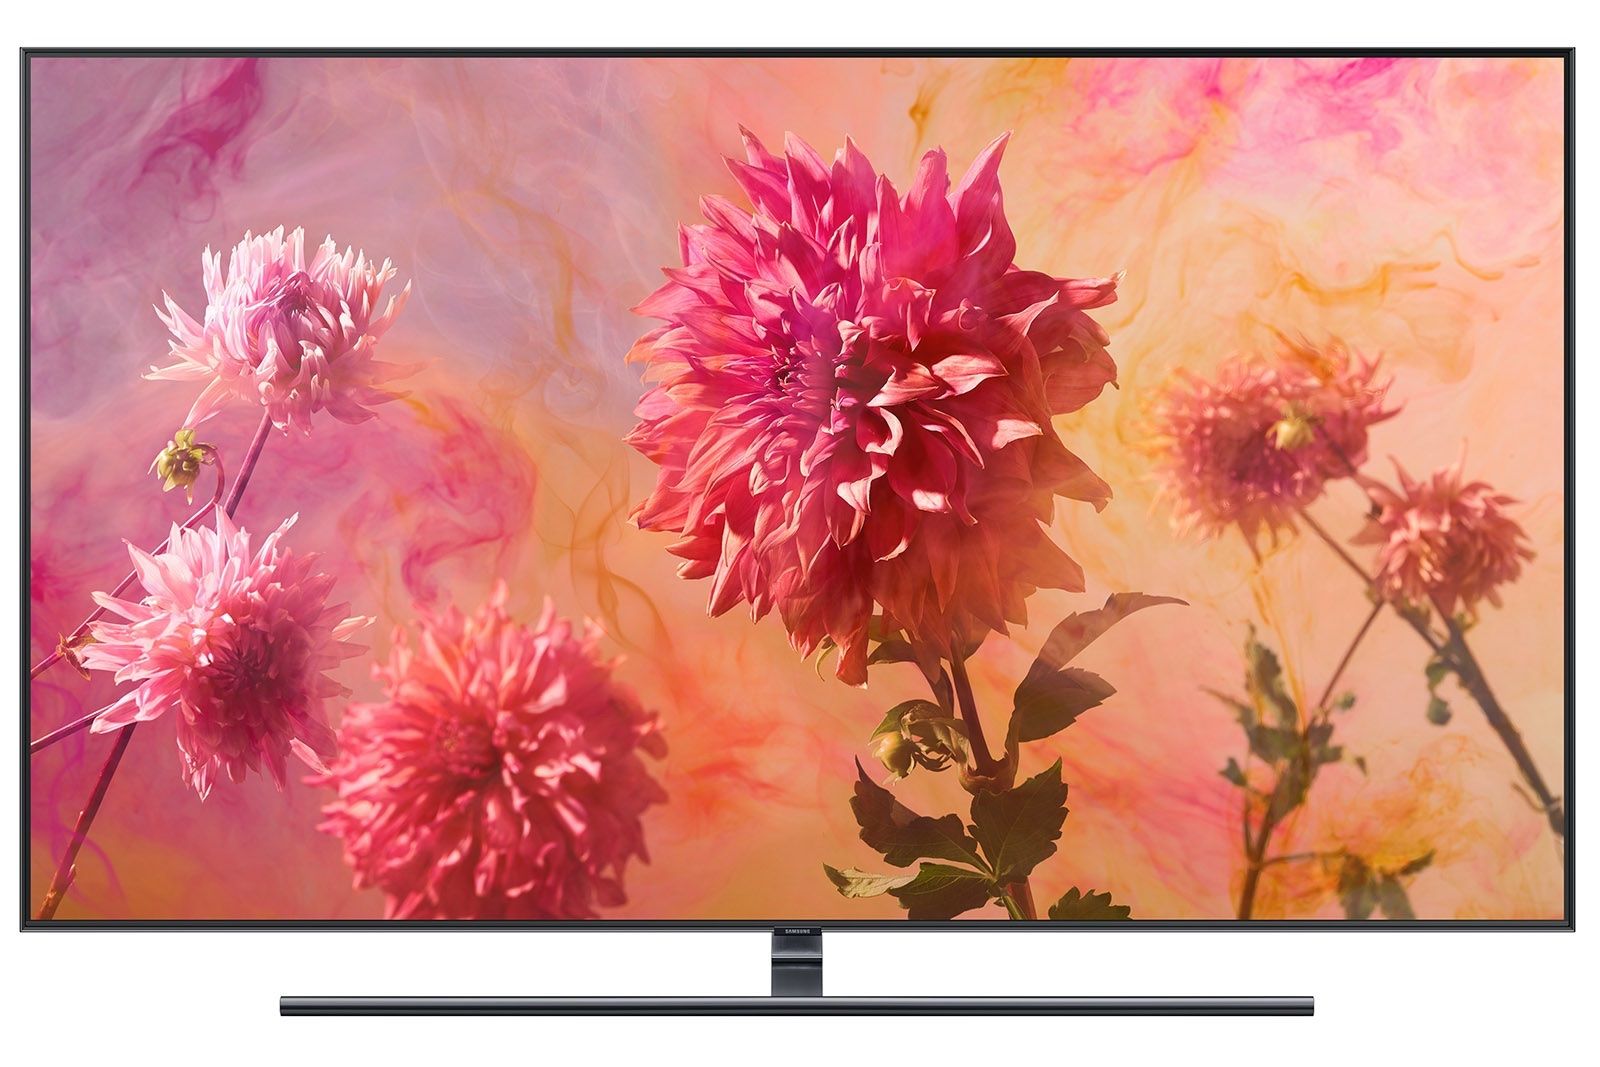 Samsung Q9FN QLED TV review image 1